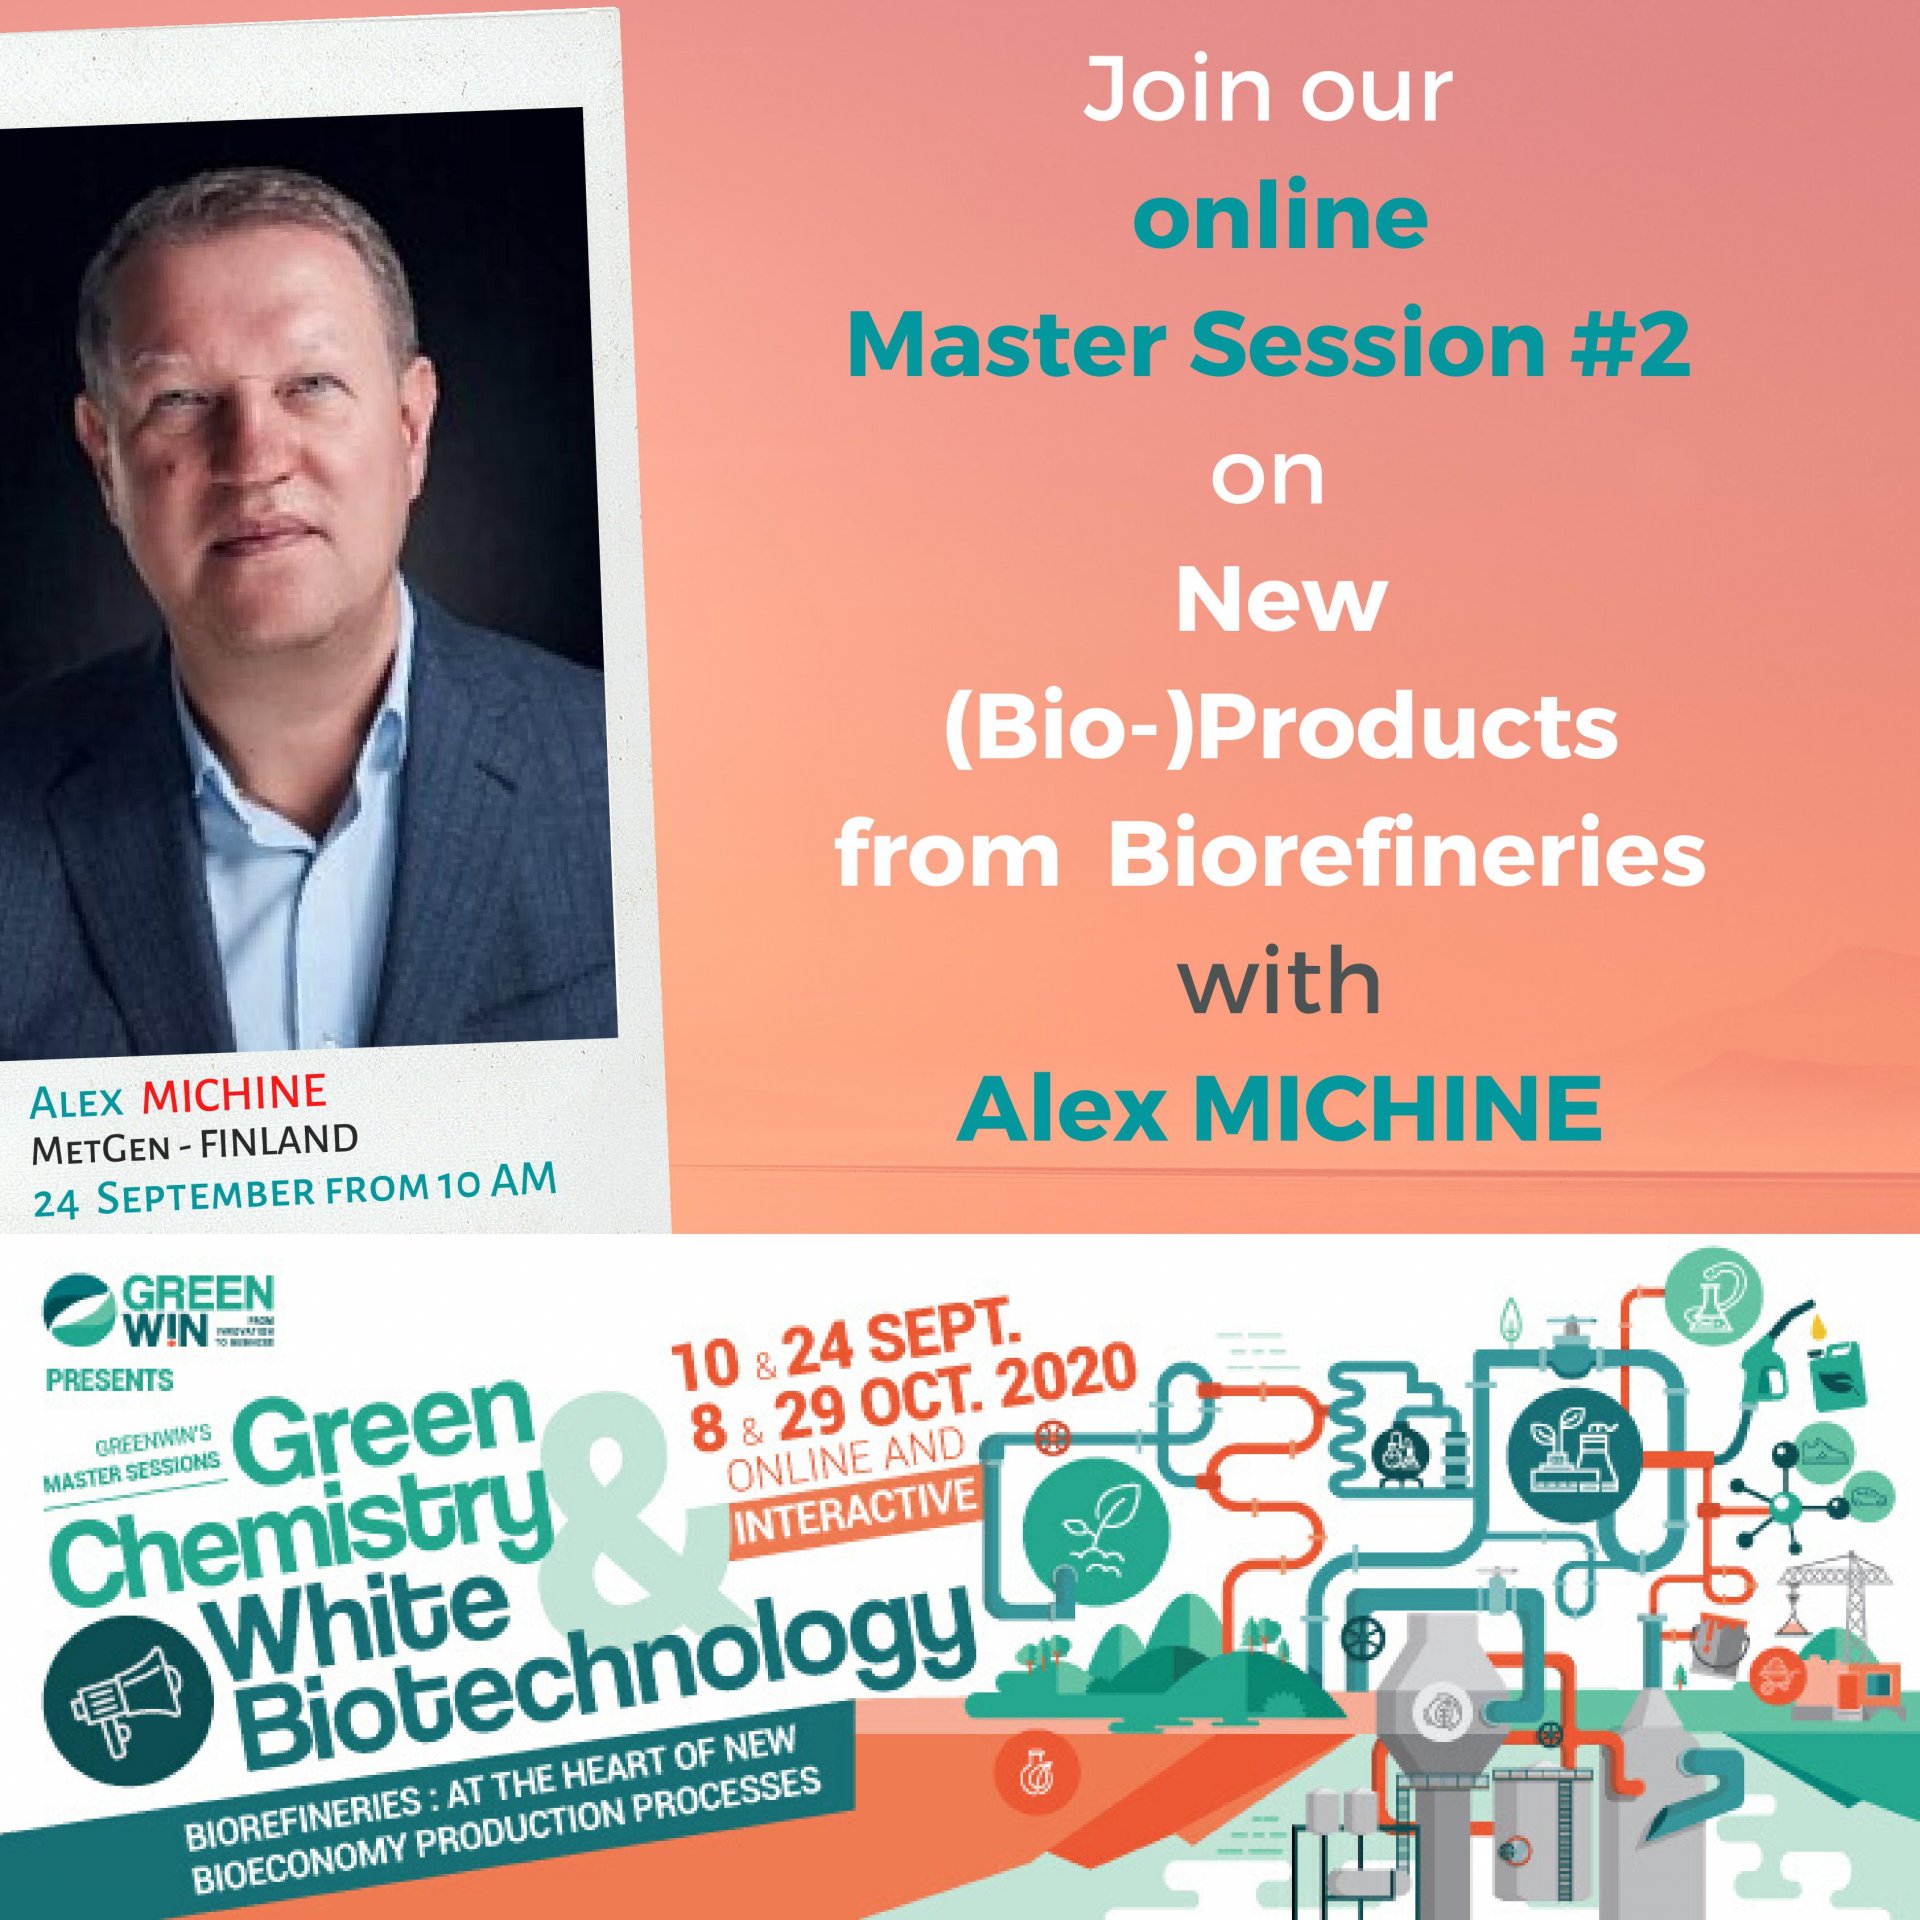 Meet Alex MICHINE  from MetGen - Finland, on our online Master Session #2 on 24 September at 10 AM